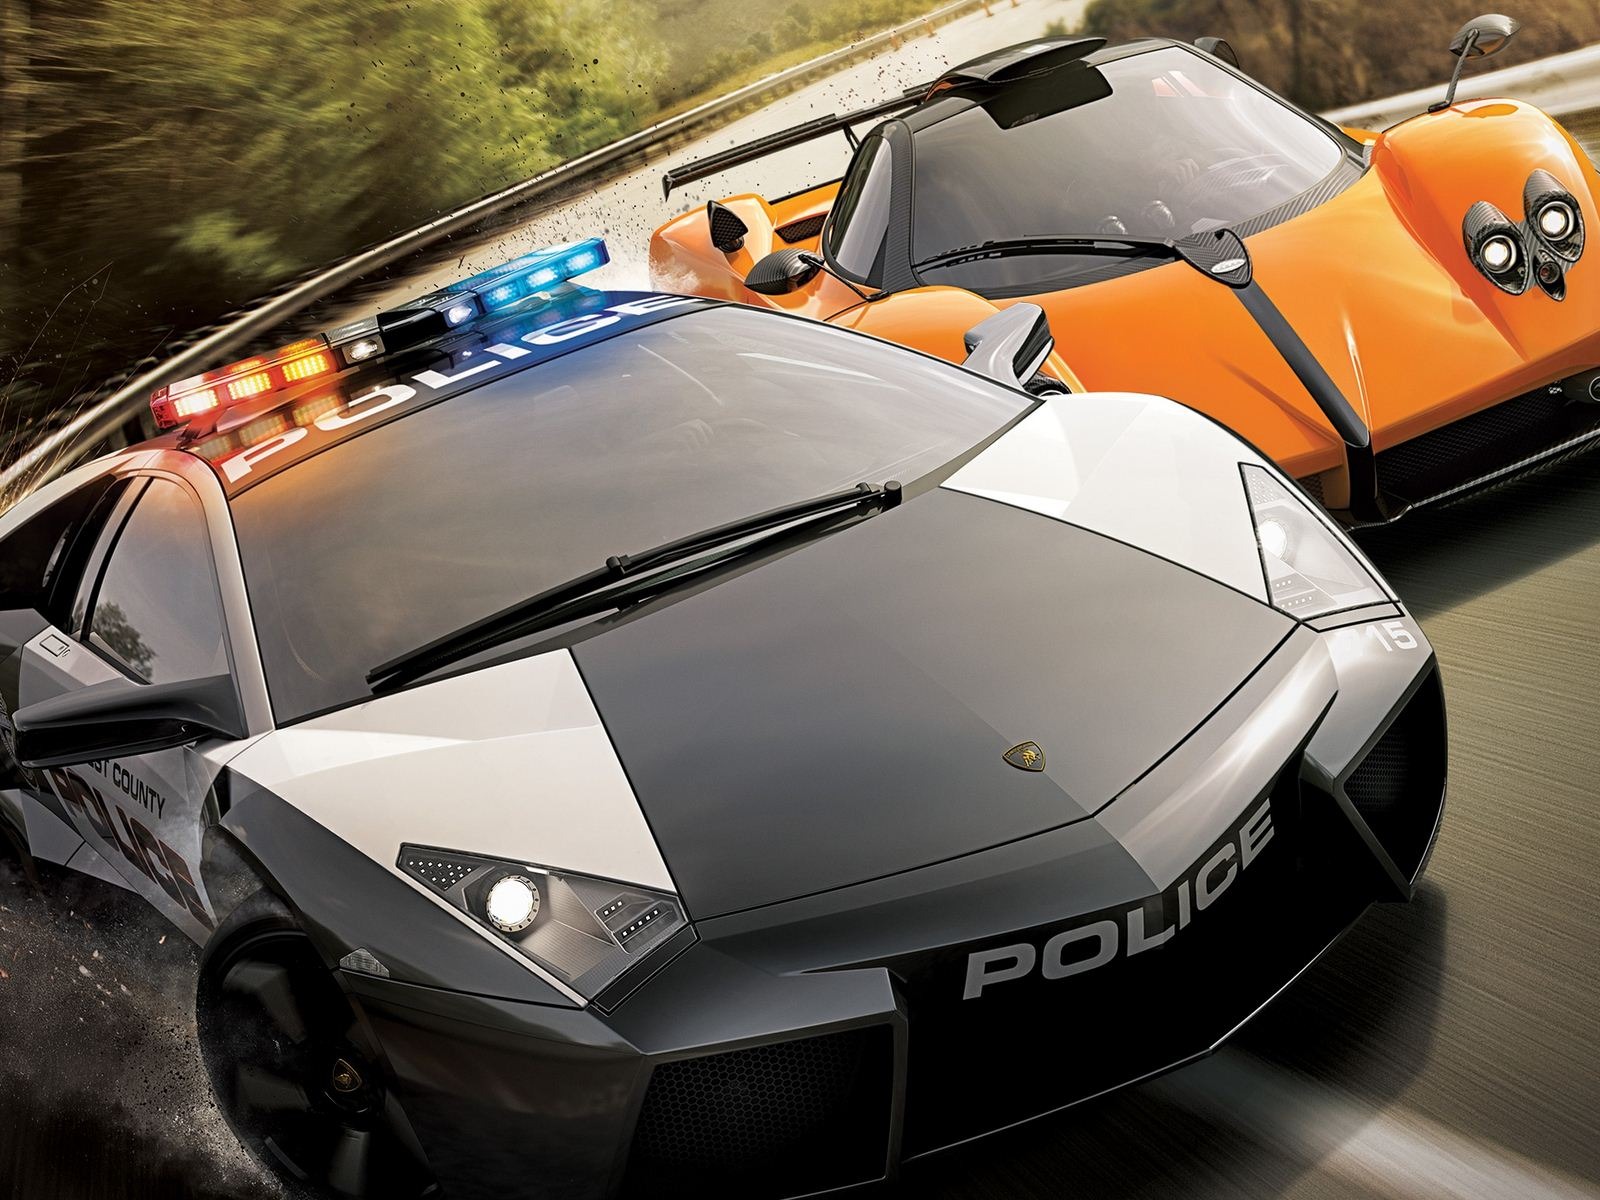 Need for Speed: Hot Pursuit 极品飞车14：热力追踪3 - 1600x1200